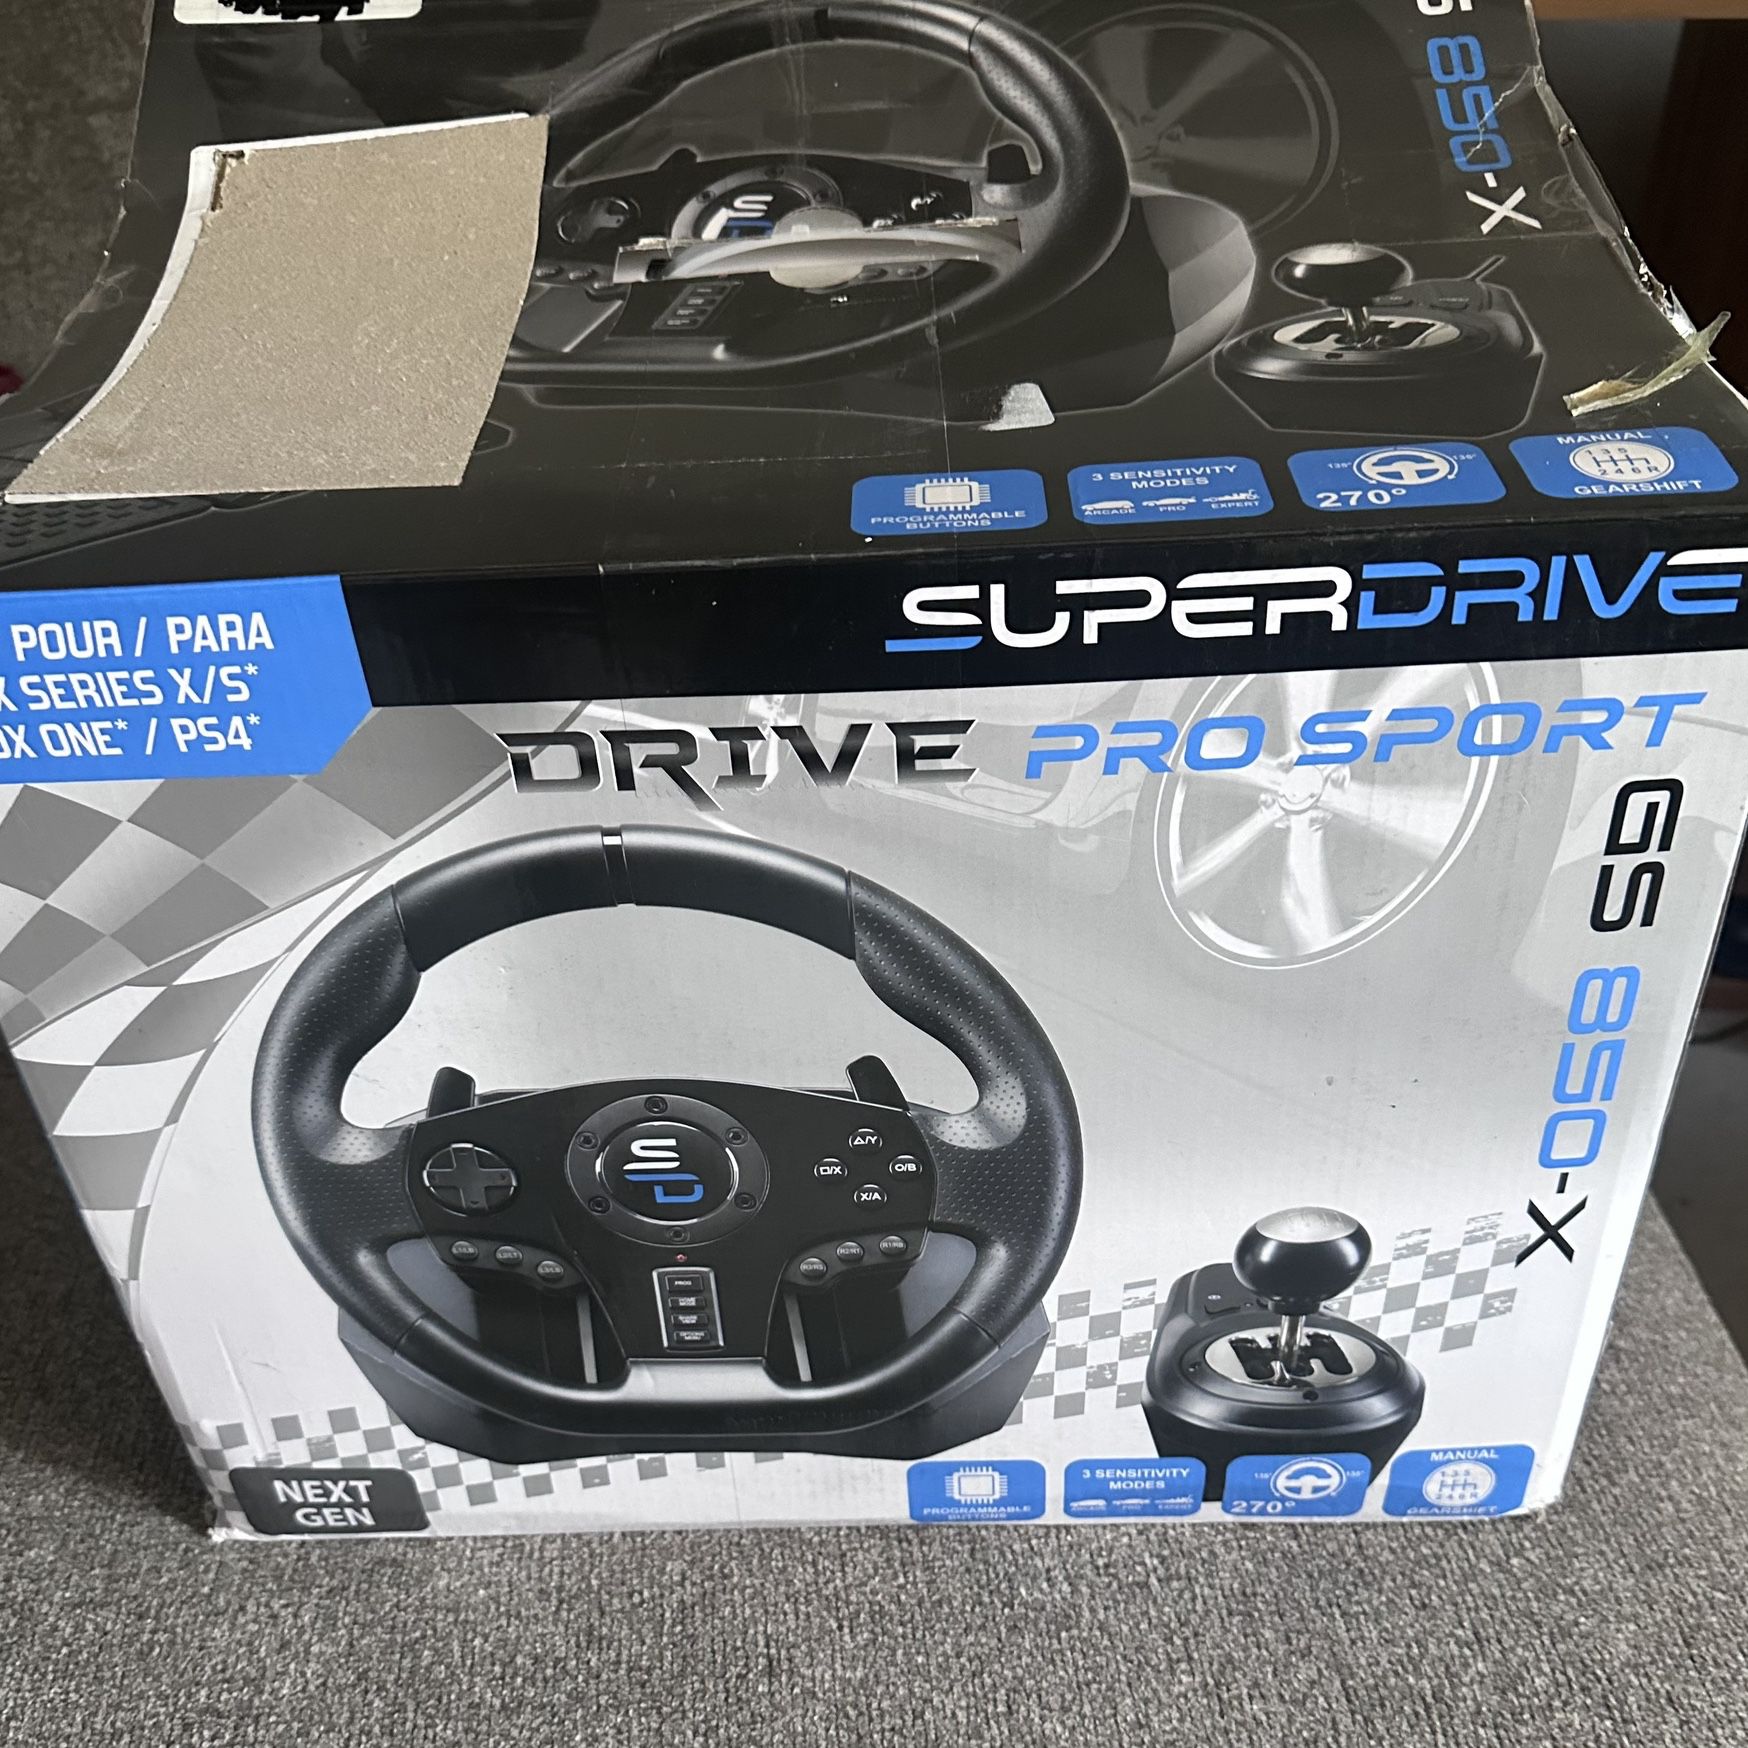 DRIVE PRO SPORT GS850-X - Superdrive Gaming